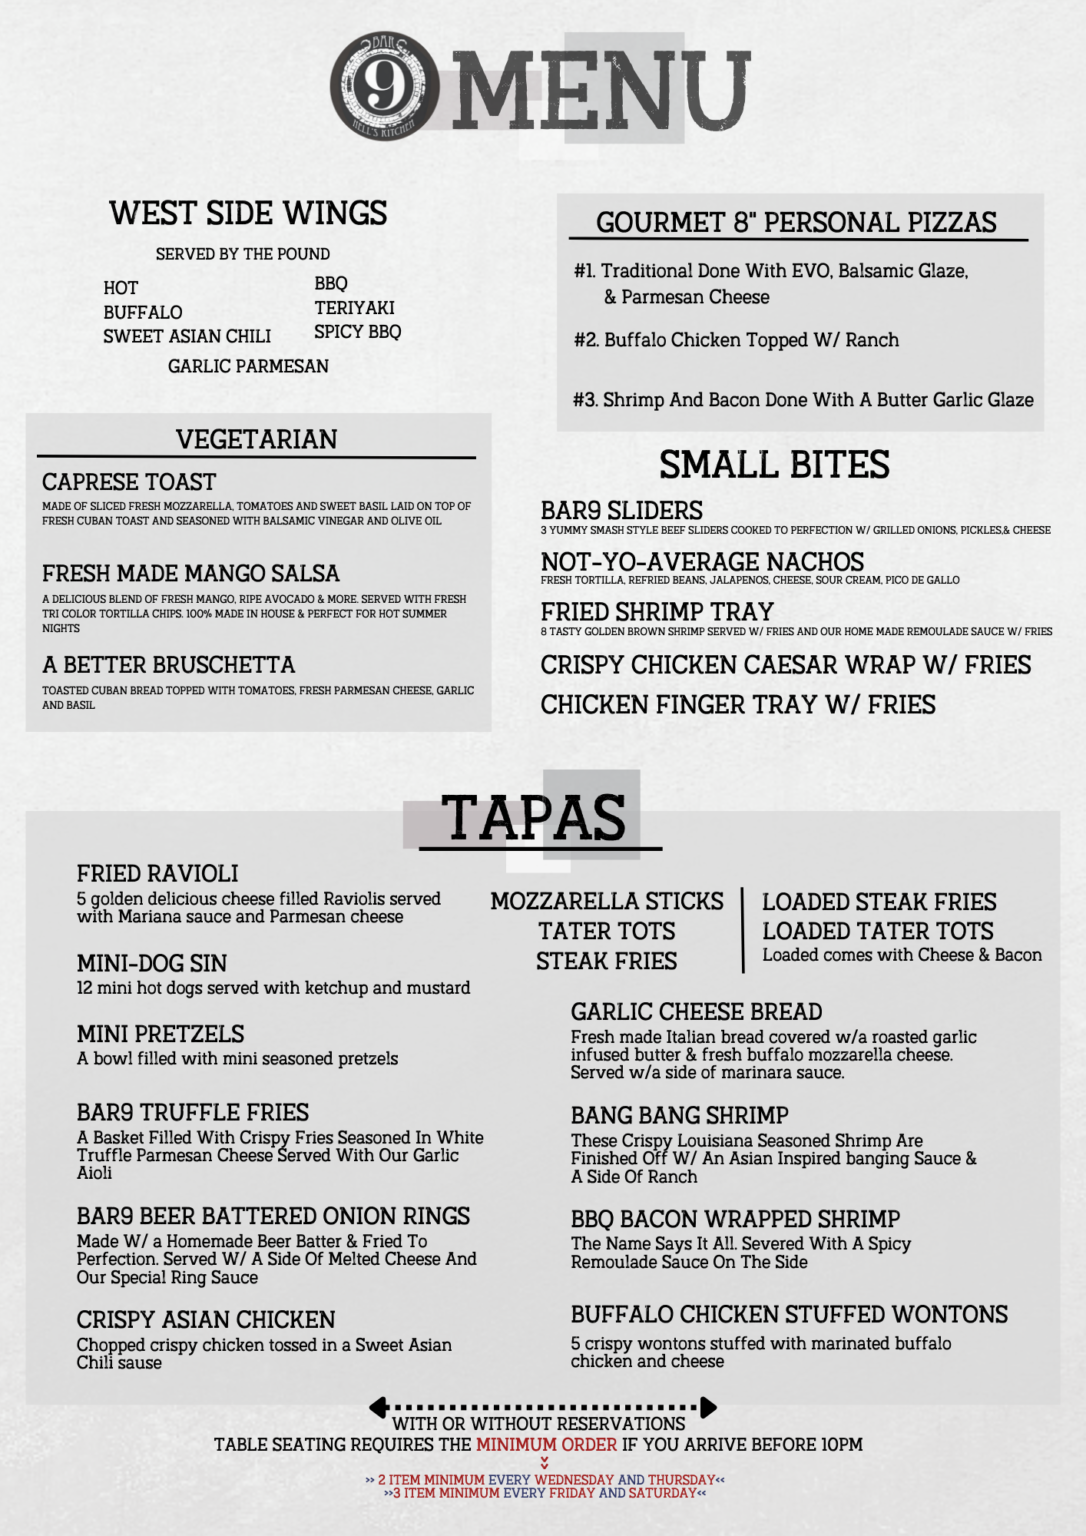 Welcome to Bar9Nyc, we have huge menu for our restaurent, start with side dishes west side wings served by pound hot, buffalo, sweet asian chili, bbq, teriyaki, spicy bbq, garlic parmesan, we also have vegetarian food which include caprese toat, fresh made mango salsa, a better bruschetta, along with vegetarian food we also have gourmet 8 personal pizzas first one is traditional done with evo, balsamic glaze, and parmesan cheese, two, buffalo chicken topped W/ Ranch, three shirmp and bacon done with a better garlic glaze, we have small bites in our menu as well bar9 sliders, not-yo-average nachos, fried shirmp tray, crispy chicken caesar wrap W/ Fries, Chicken finder tray W/ fries, we also have tapas friend ravioli, mini dog sin, mini pretzels, bar9 truffle fries, bar9 beer battered onion rings, crispy asian chicken, mozzarella sticks, tater tots, steak fries, loaded steak fries, loaded tater tots, steak fries, garlic chees bread, bang bang shirmp, bbq bacon wrapped shrimp, buffalo chicken stuffed wontons! so important things is with or without reservarions, table seating requires the minimum order if you arrive before 10PM, 2 Item minimum every wednesday and thursday, 3 item minimum every friday and saturday.